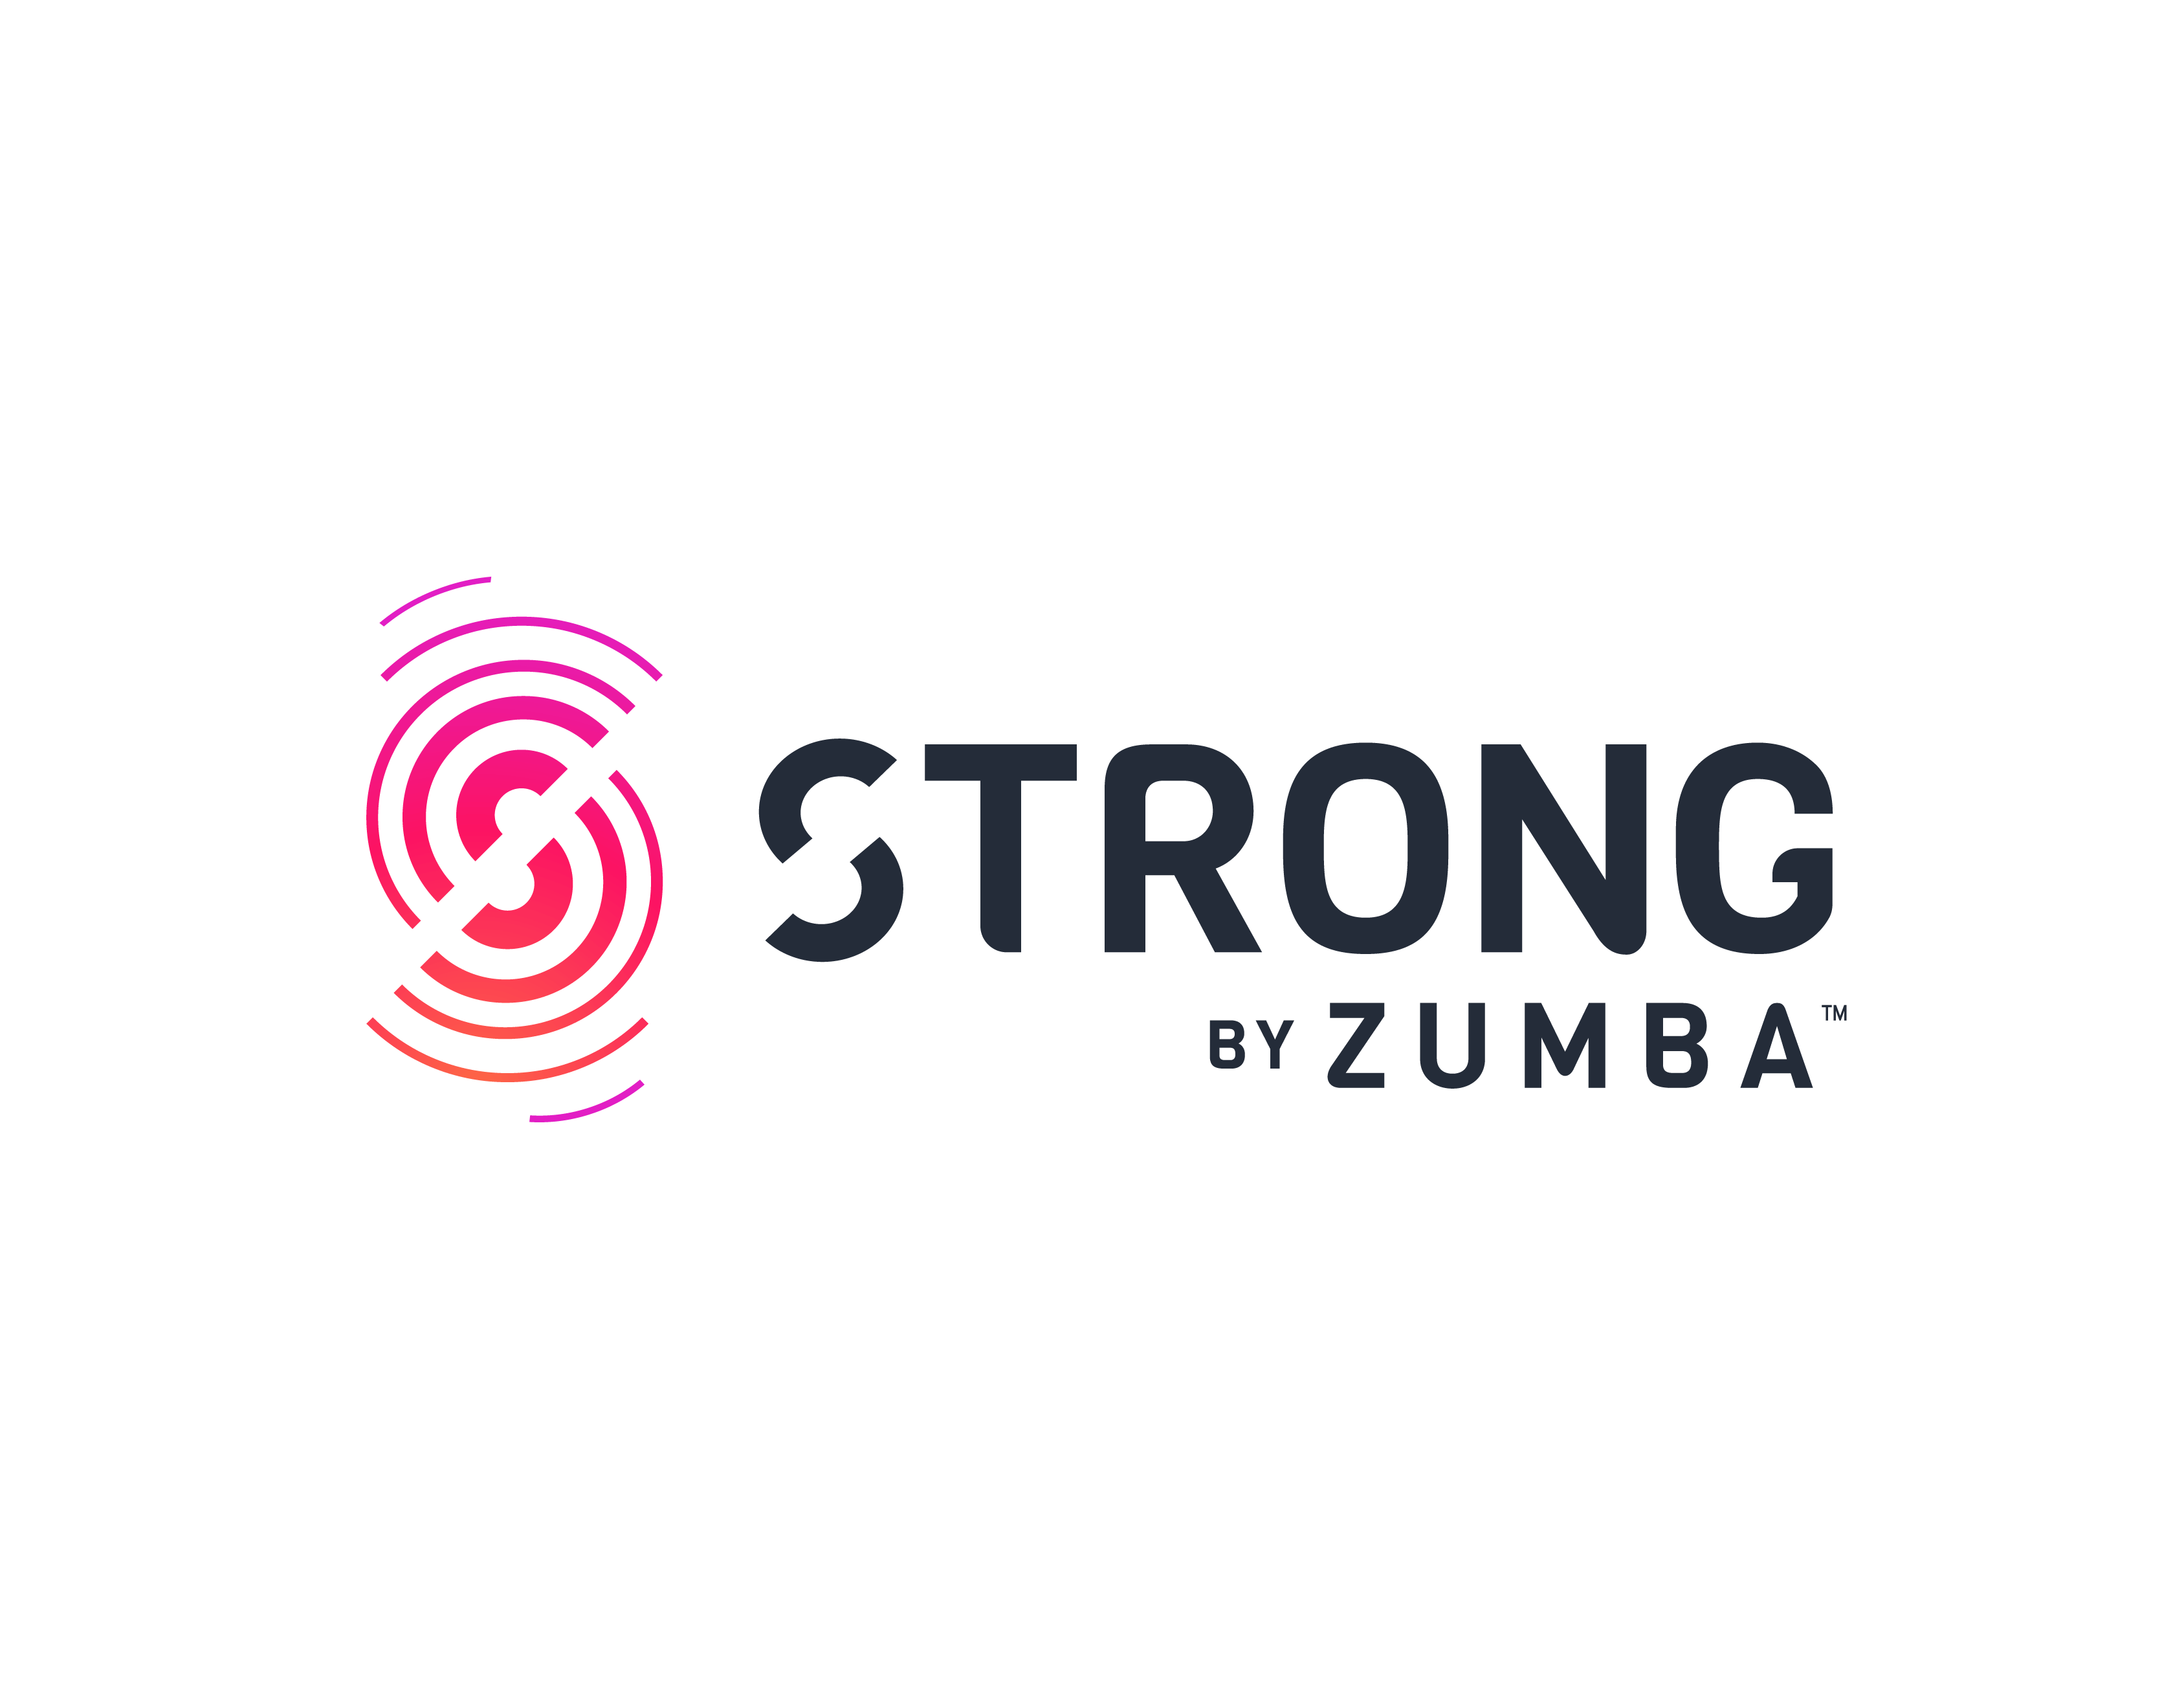 Strong by Zumba Logo - Strong